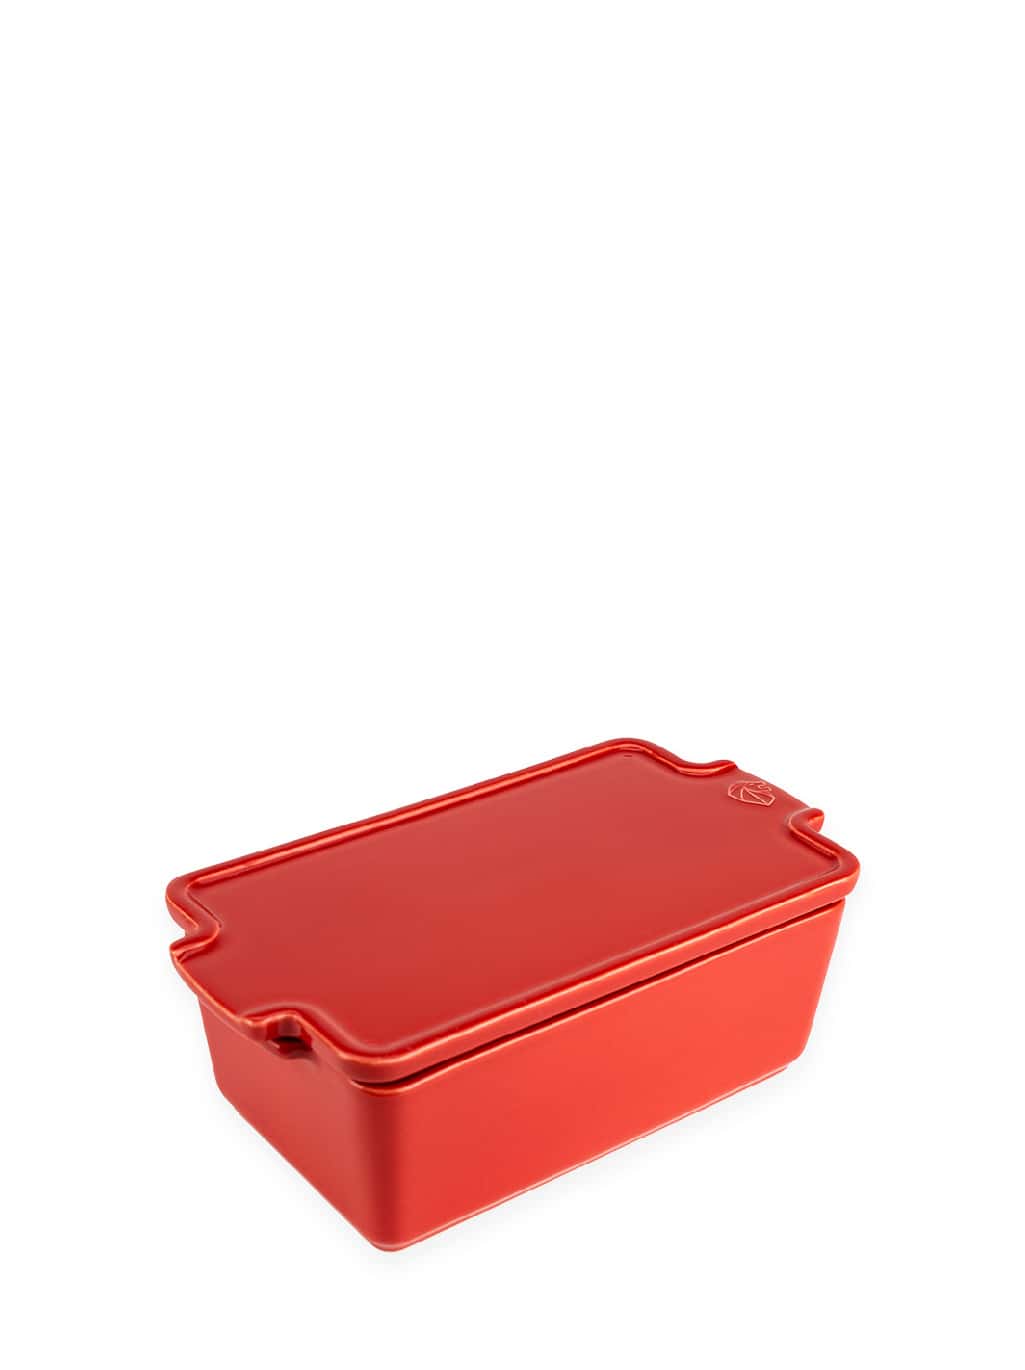 Stay tuned to check our new Tupperware 2023 Catalogue